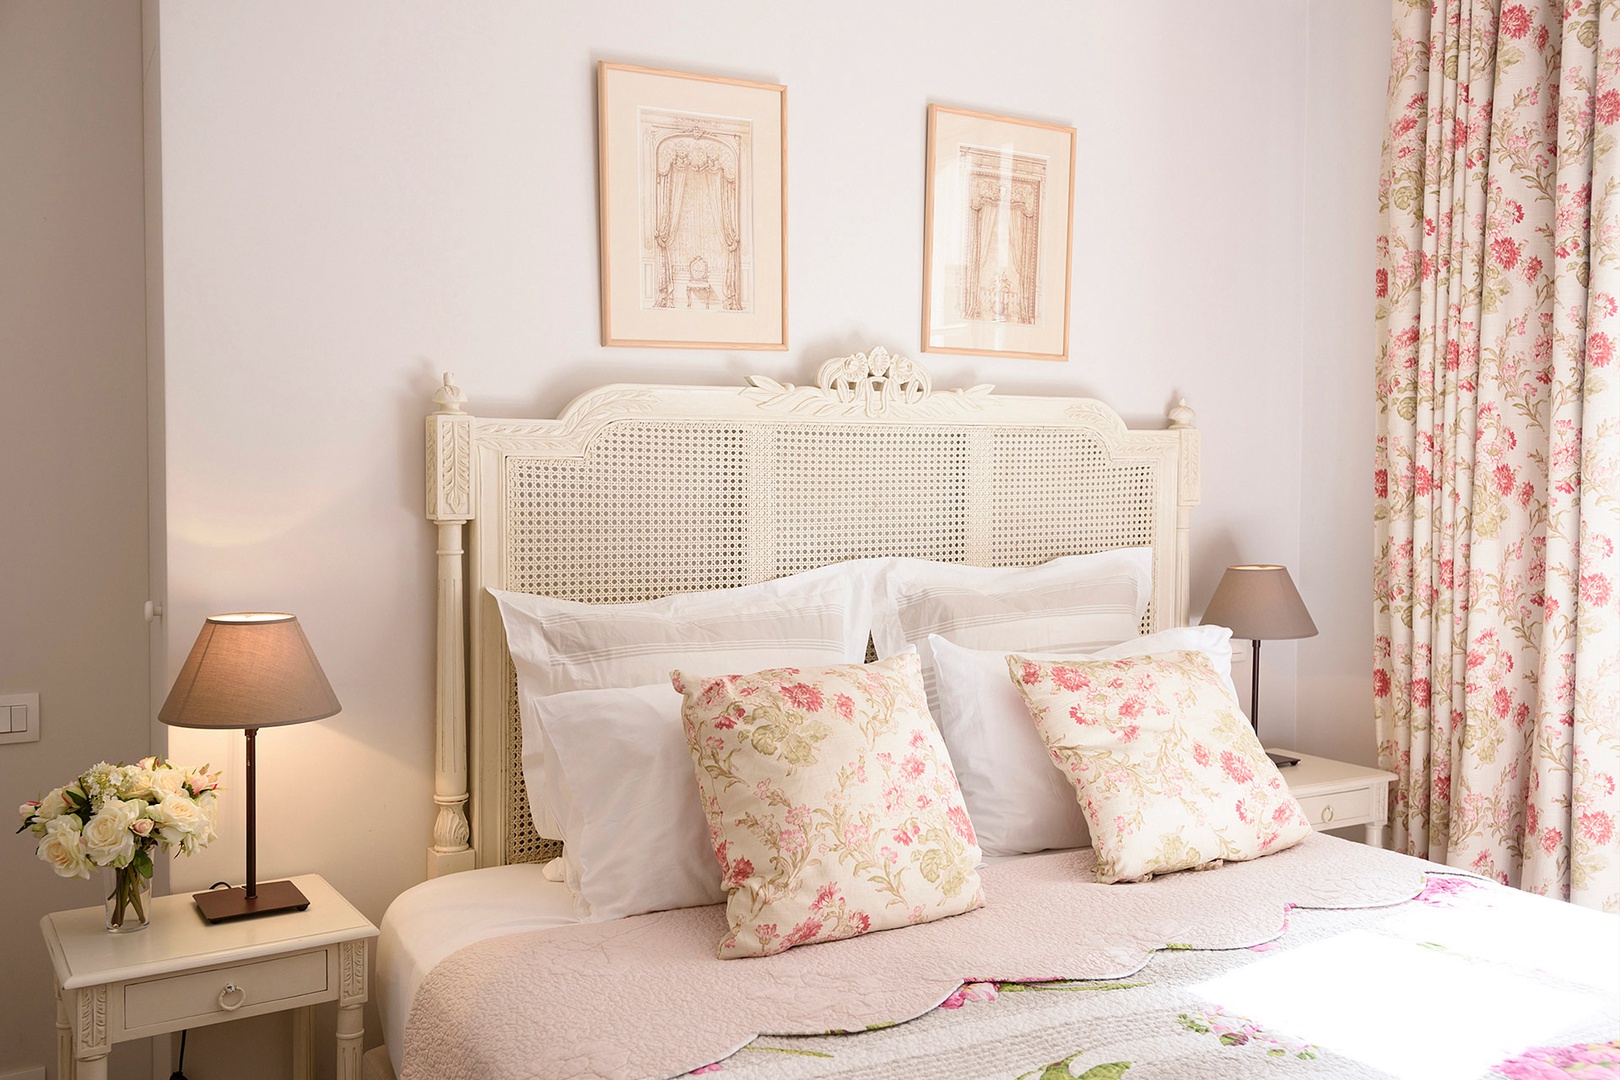 You will love the luxurious bedding and lovely décor.